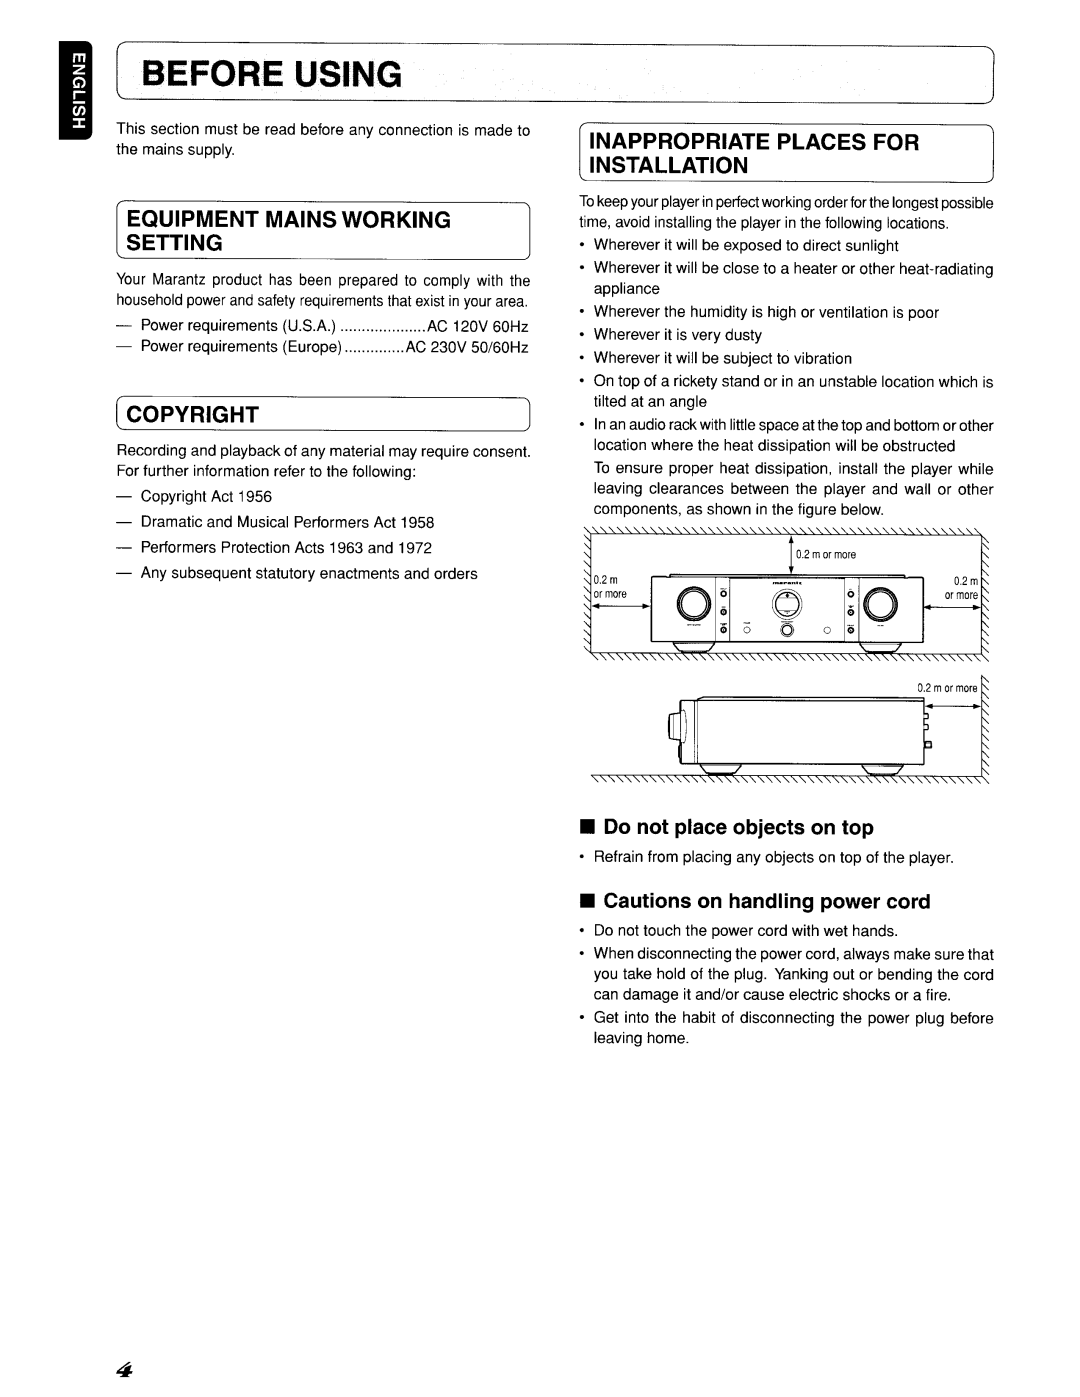 Marantz 642SC11S1, SC-11S1 manual Equipment Mains Working Setting, Copyright, Inappropriate Places For Installation, o 0 goo 